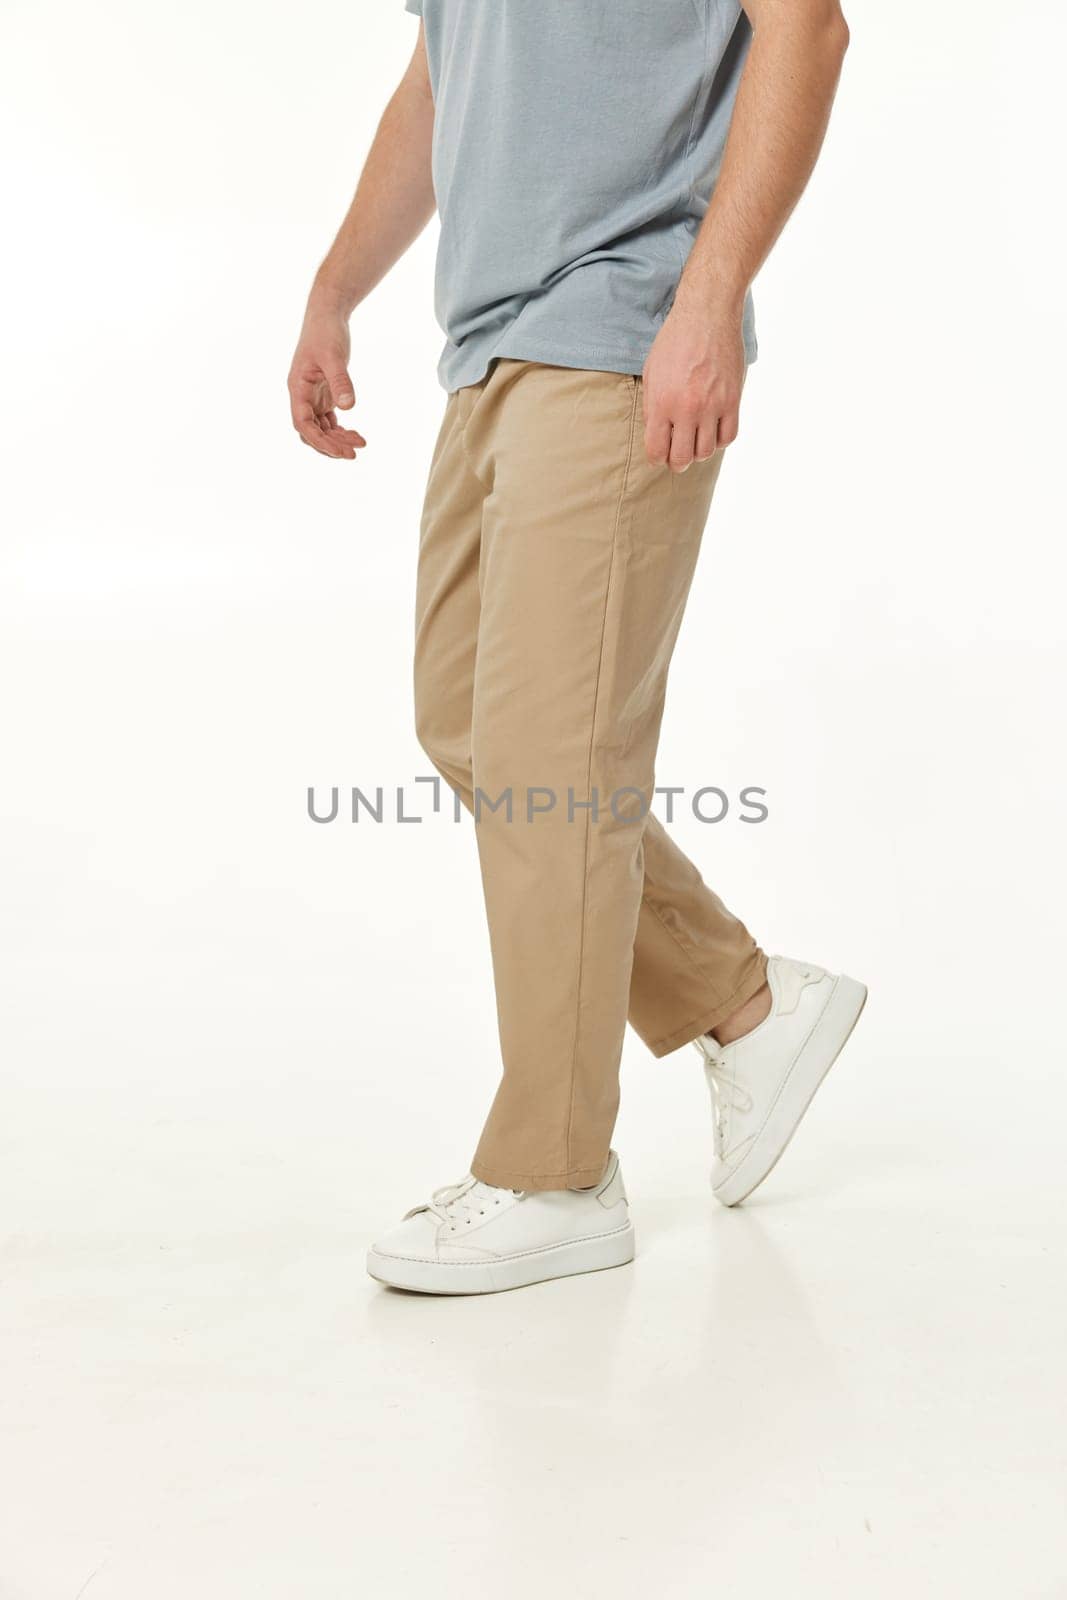 man wearing white sneakers and casual beige pants on studio background. side view